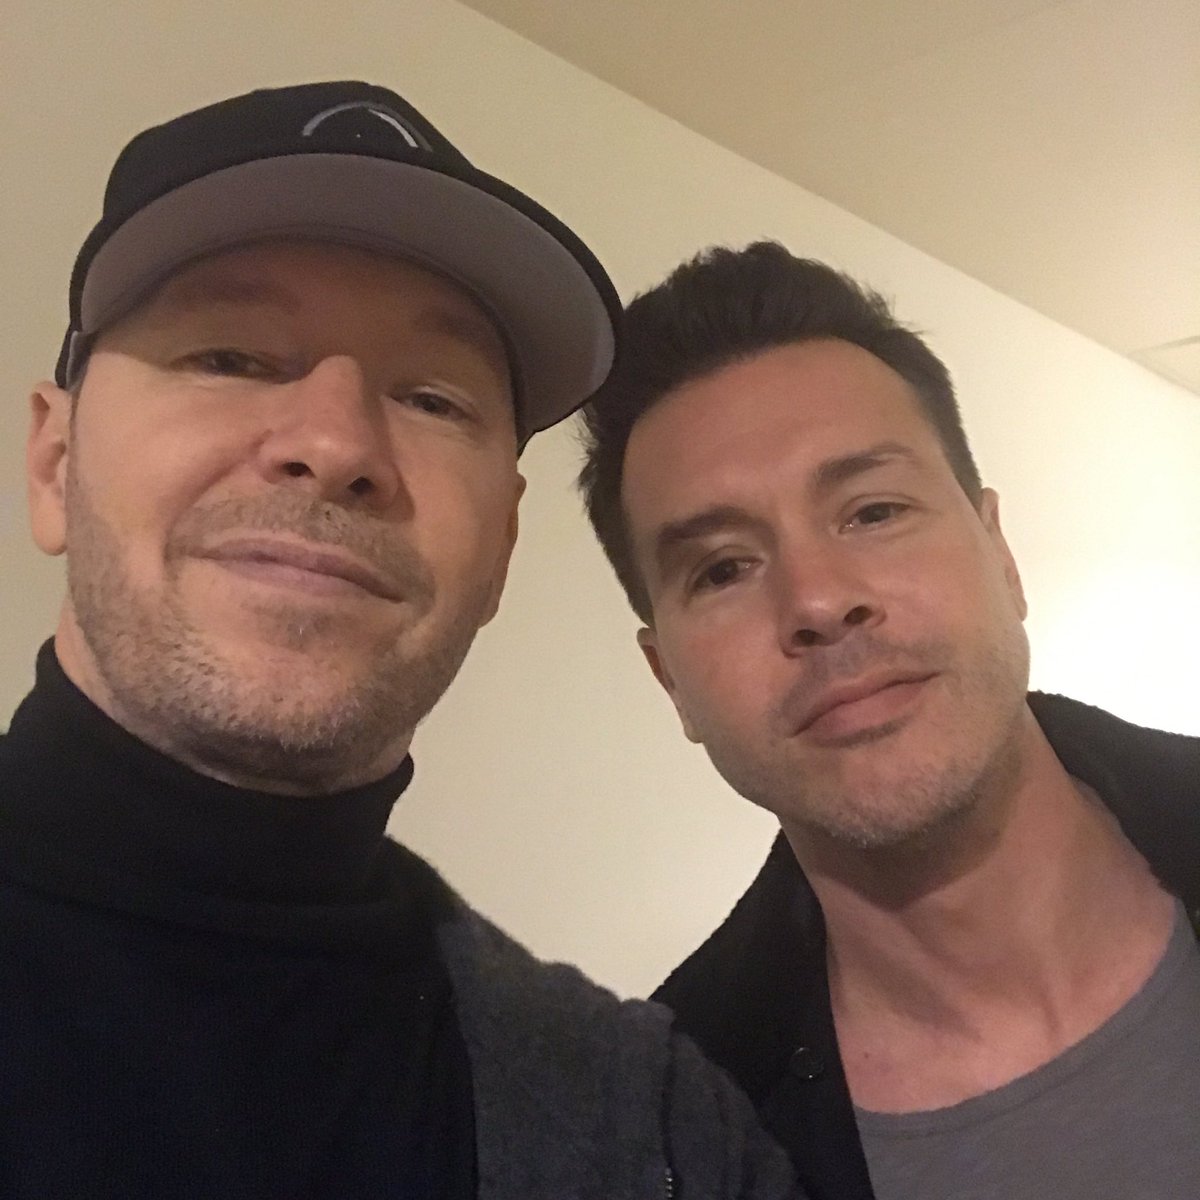 Love this guy - @JonSeda! He inspired me to do TV when I did a guest spot on his #UCUndercover show back in the day! Maybe after #BlueBloods, #ChicagoFire & #ChicagoPD - we'll team up again!